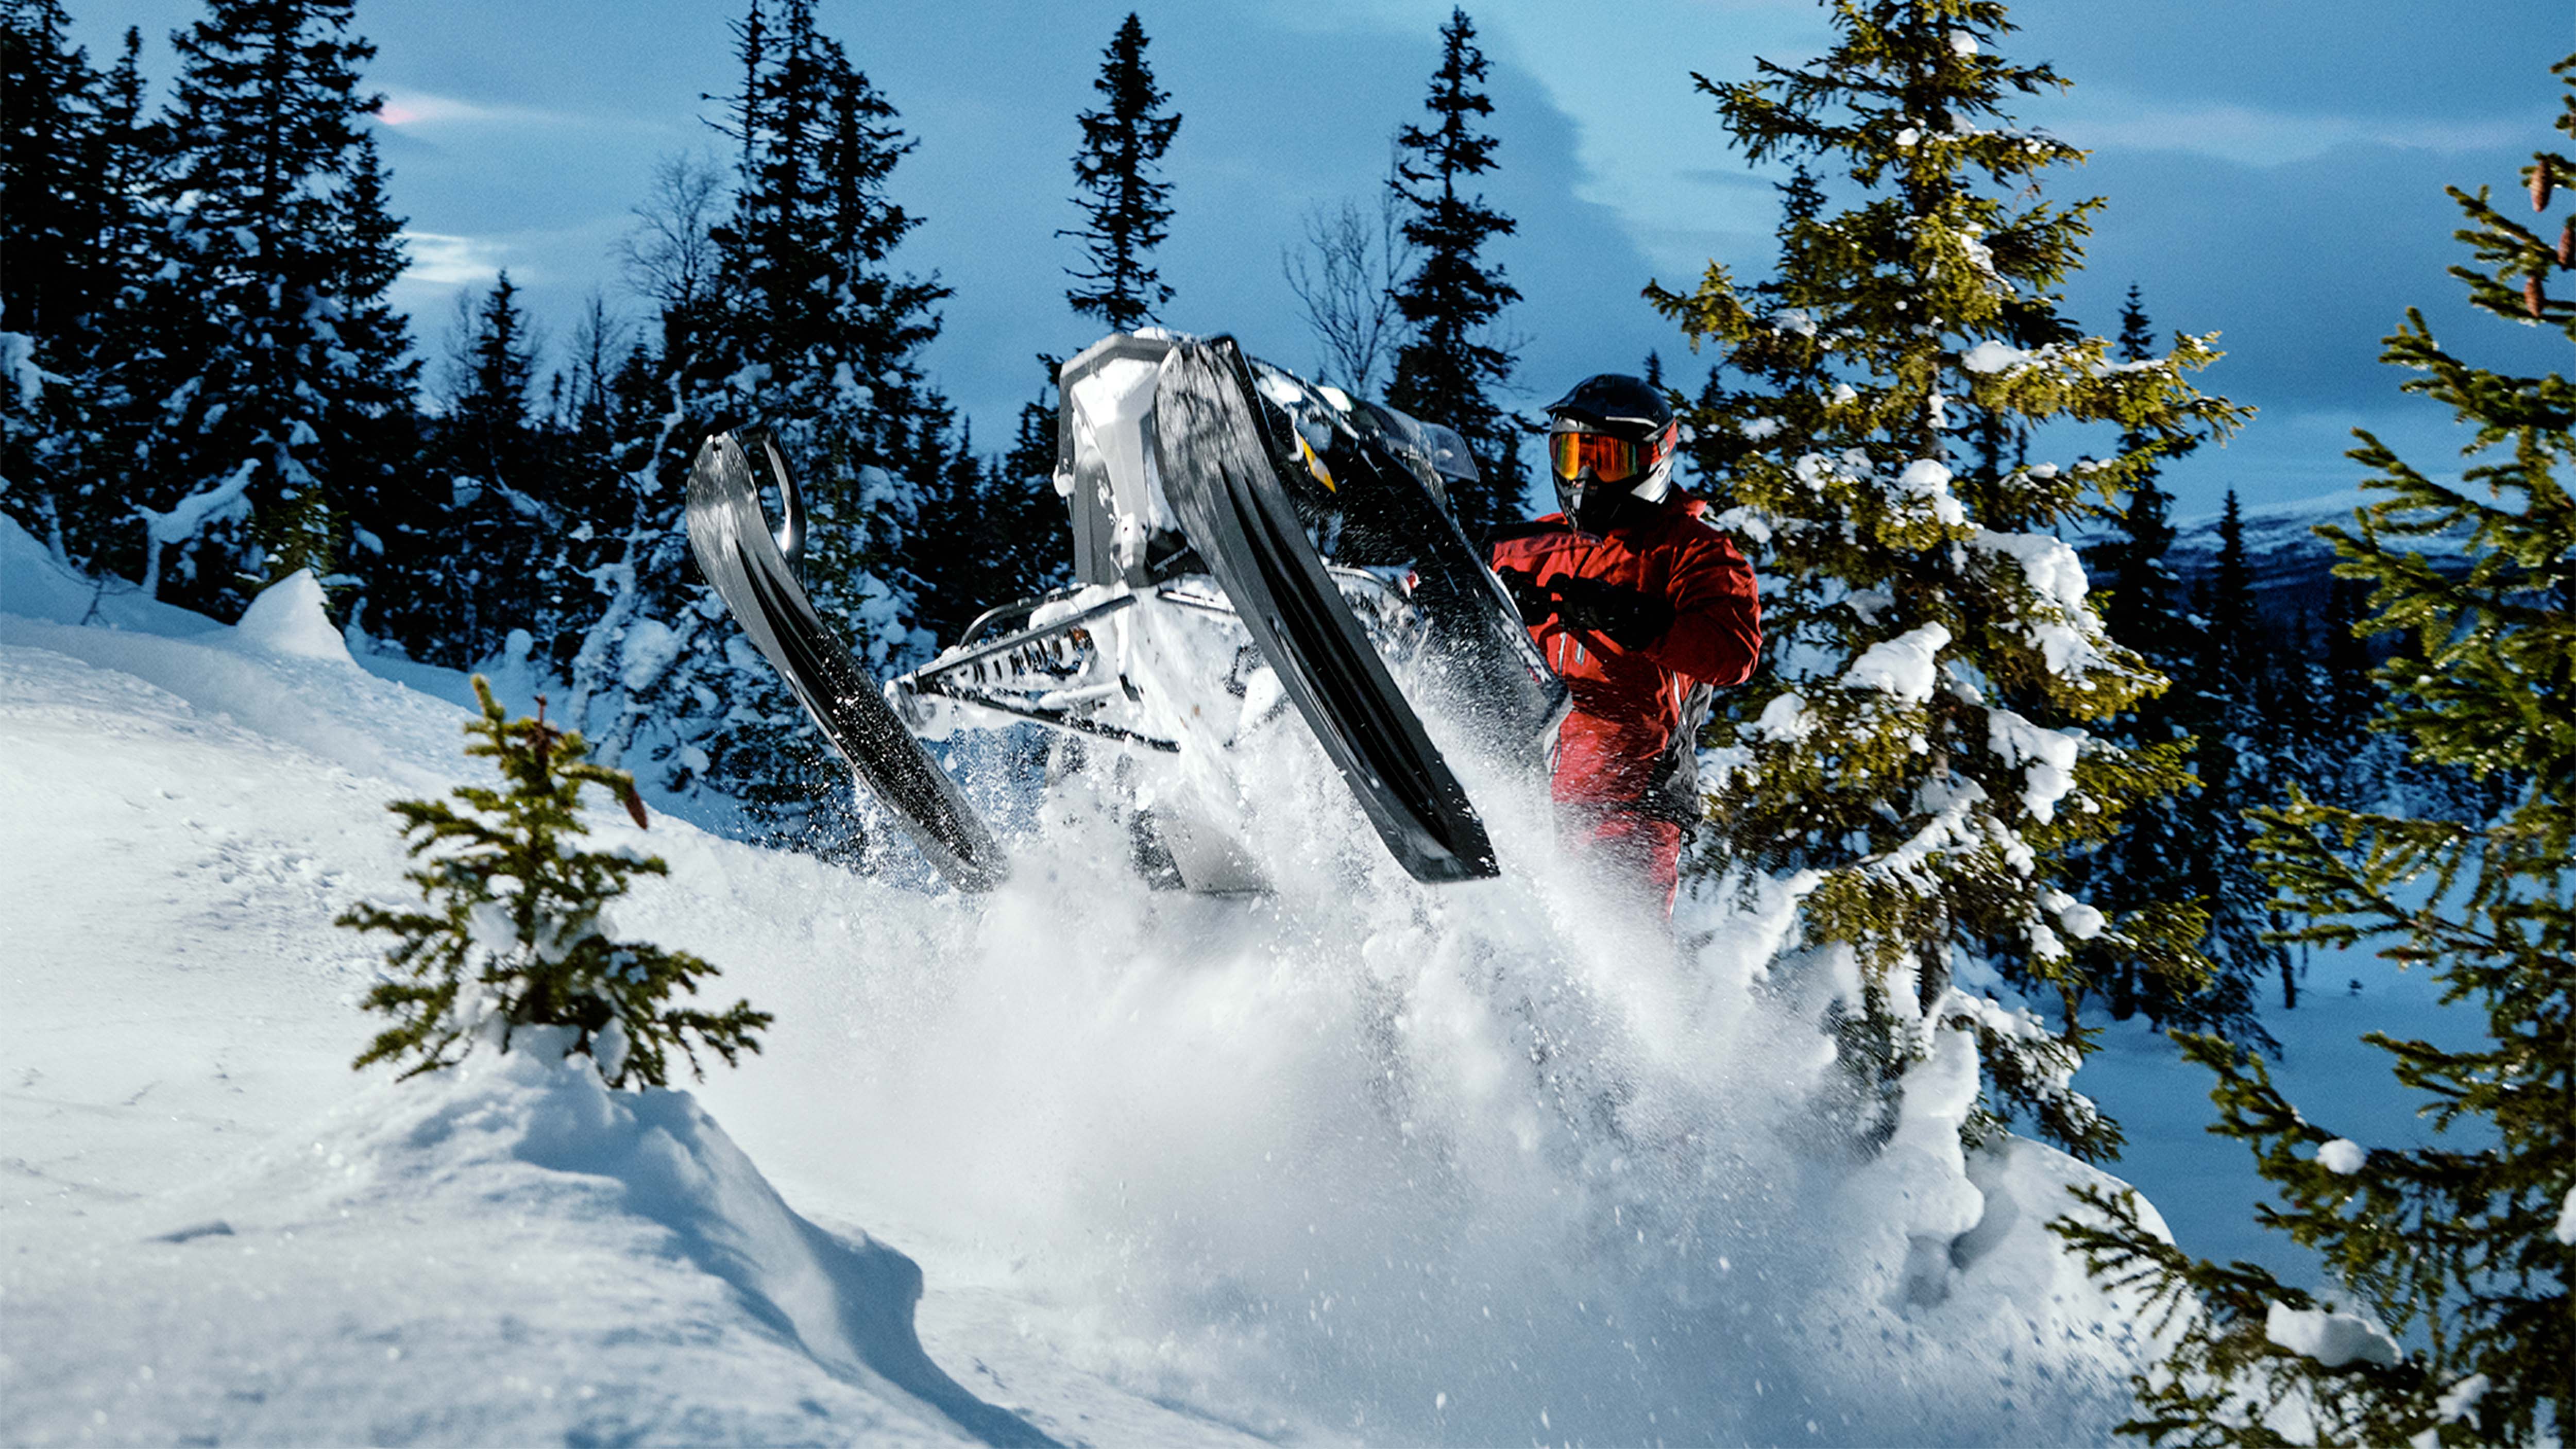 Lynx Brutal RE 2025 snowmobile wheelying uphill at the dark forest